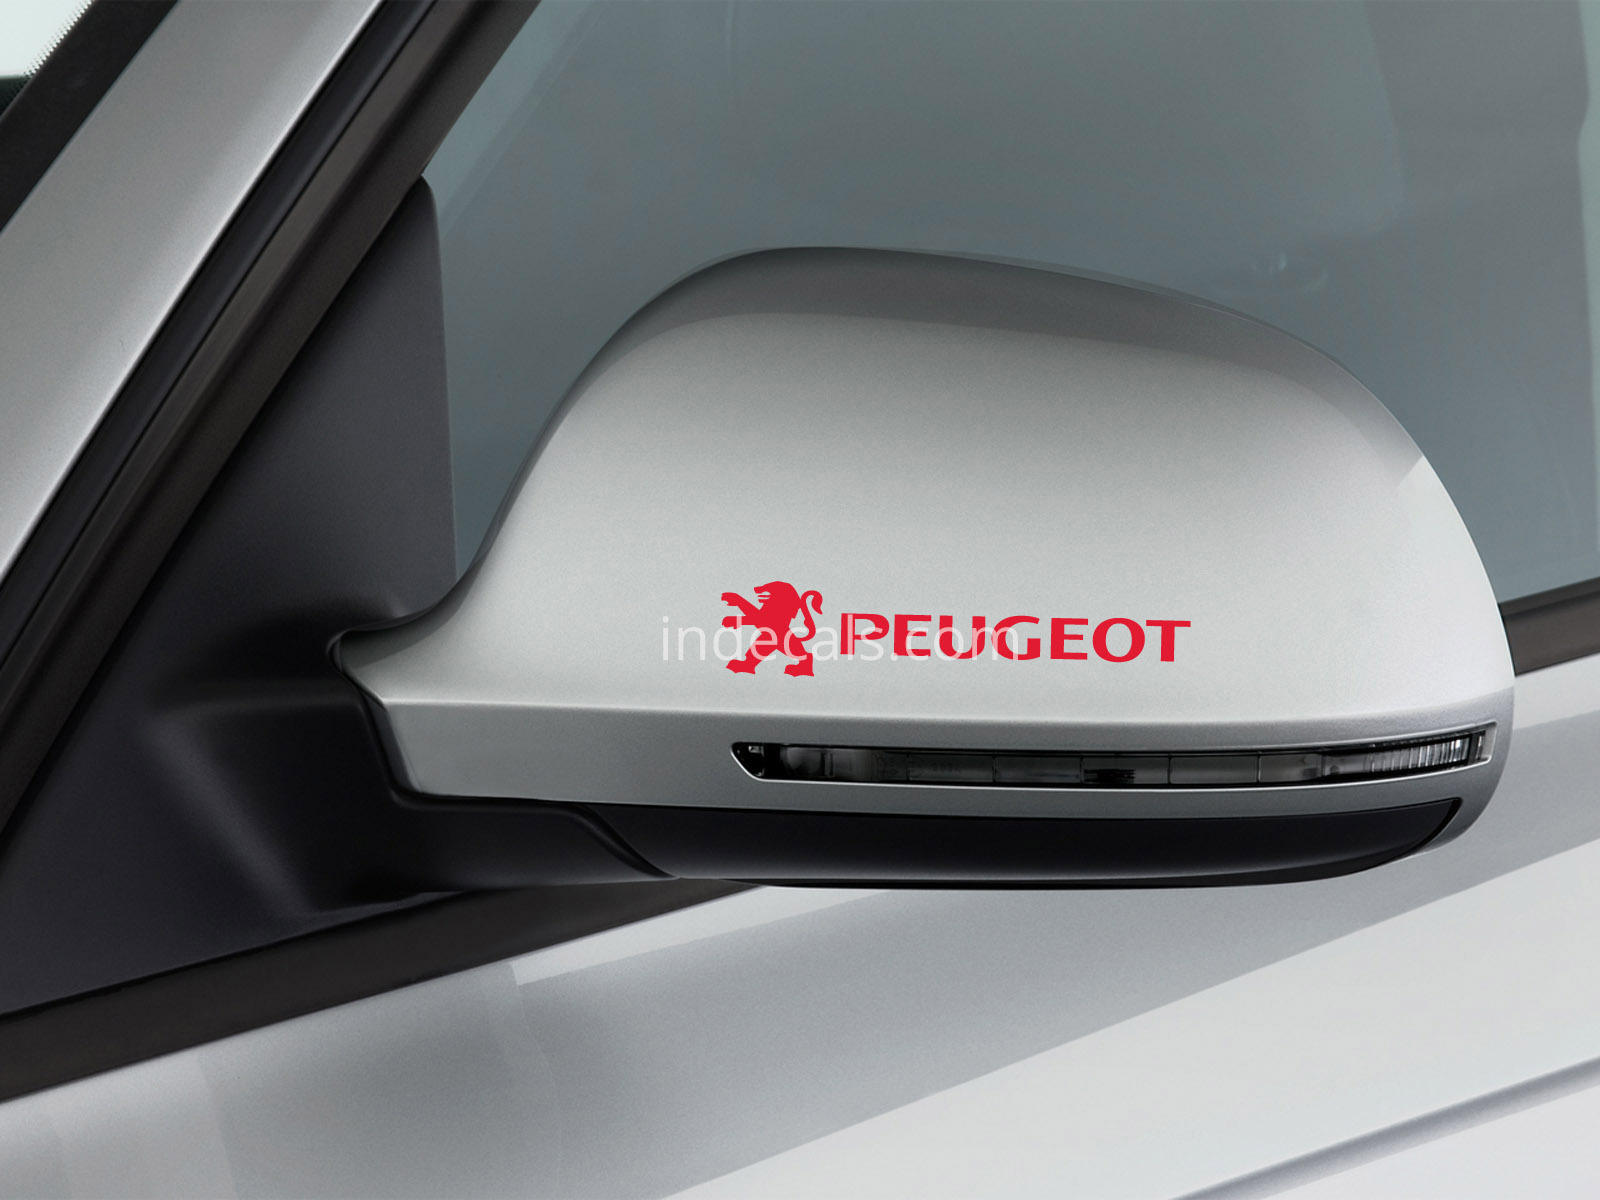 3 x Peugeot Stickers for Mirrors - Red